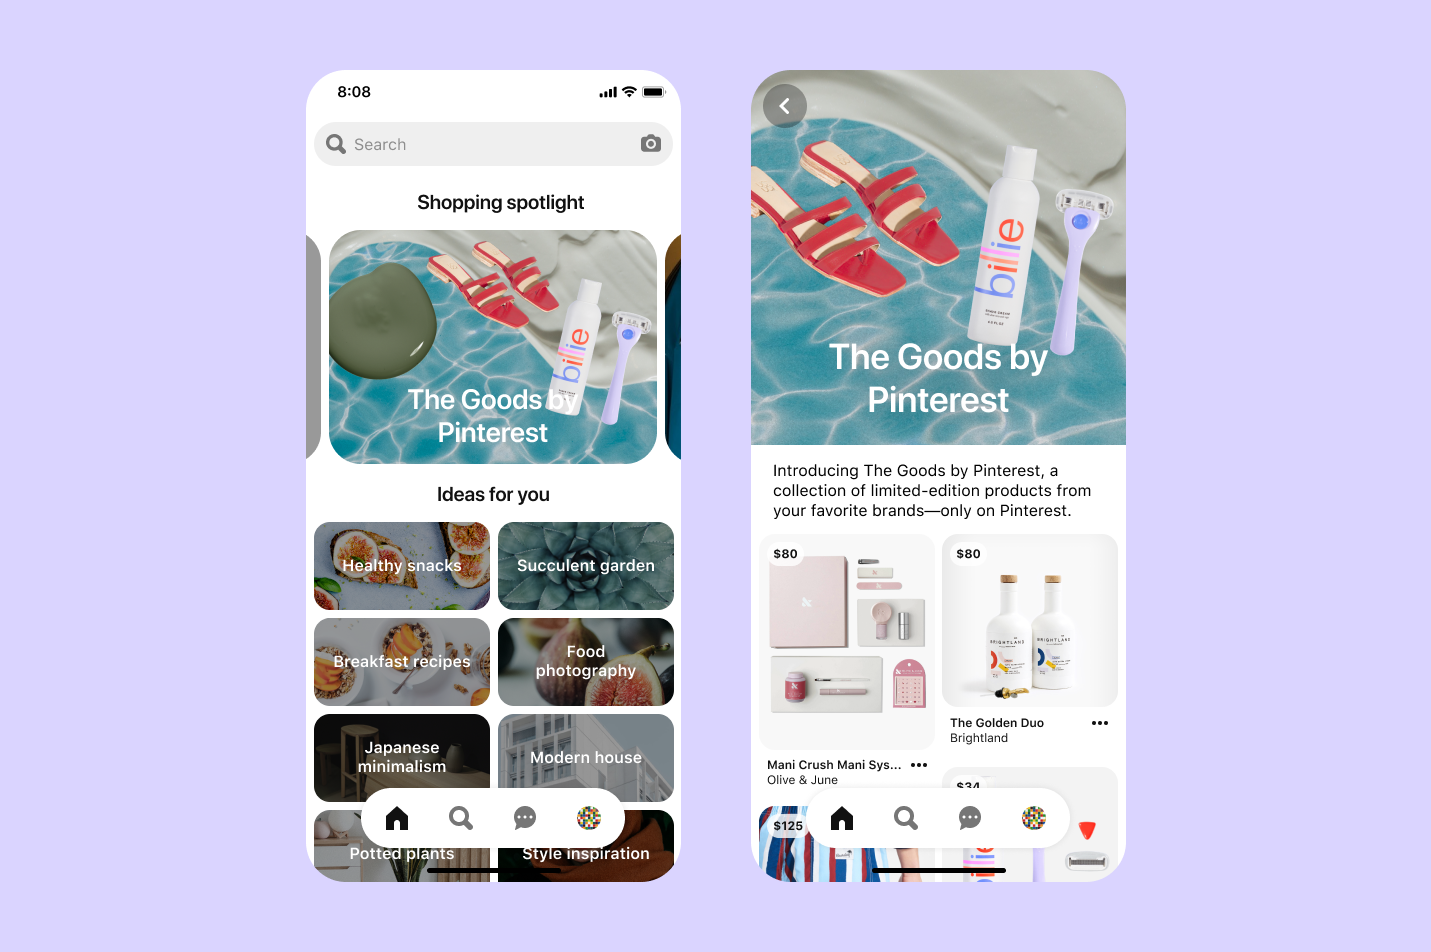 Pinterest takes the best of offline shopping and brings it online